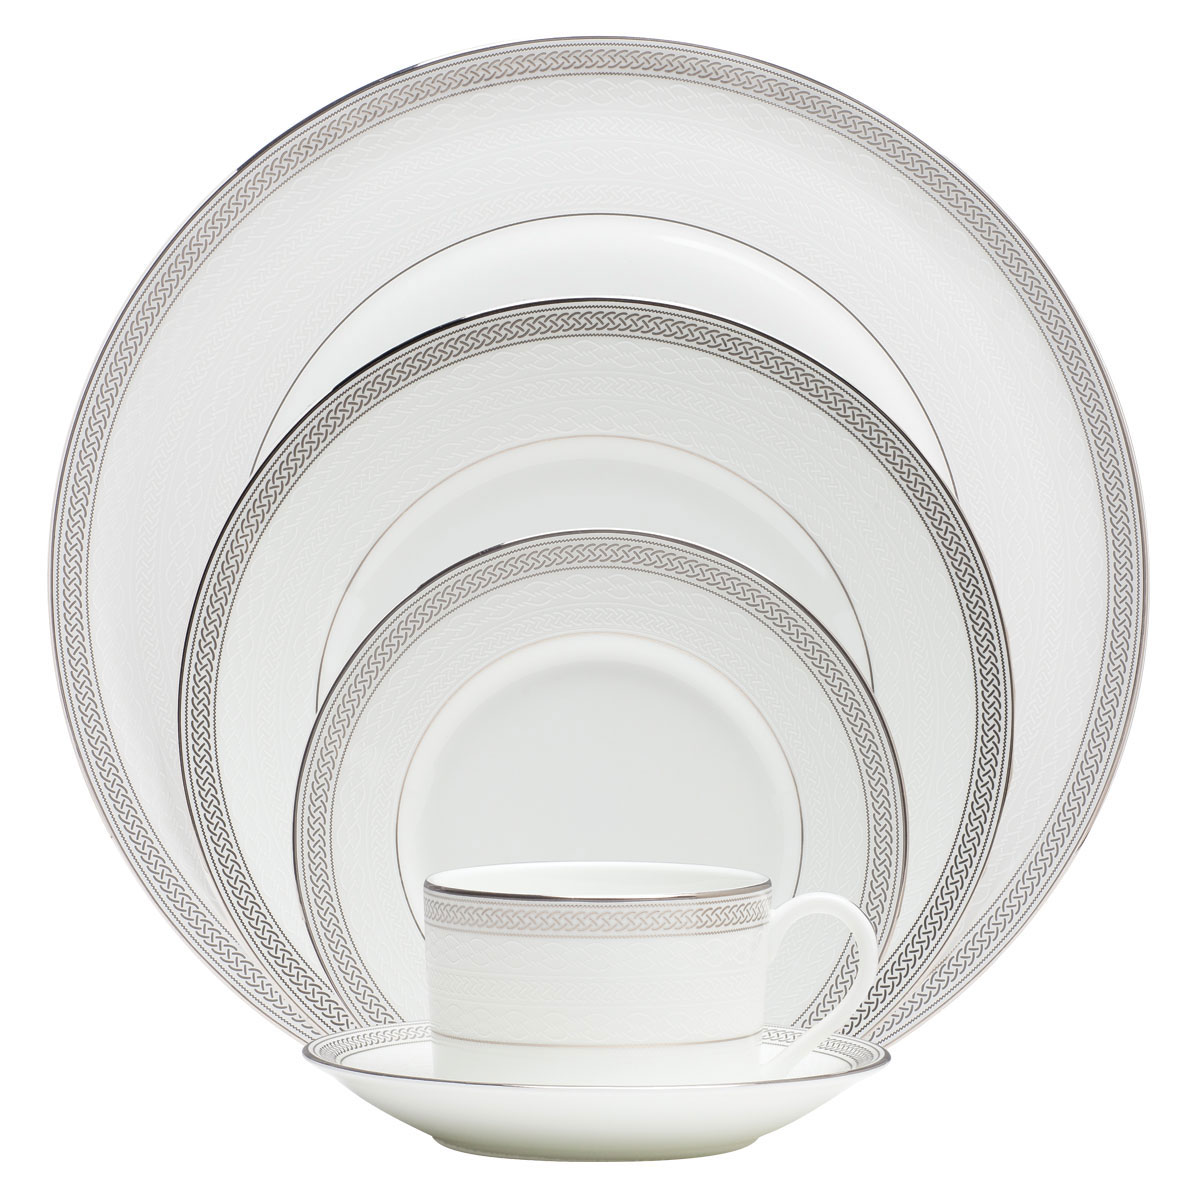 Waterford China Olann Platinum 5 Piece Place Setting